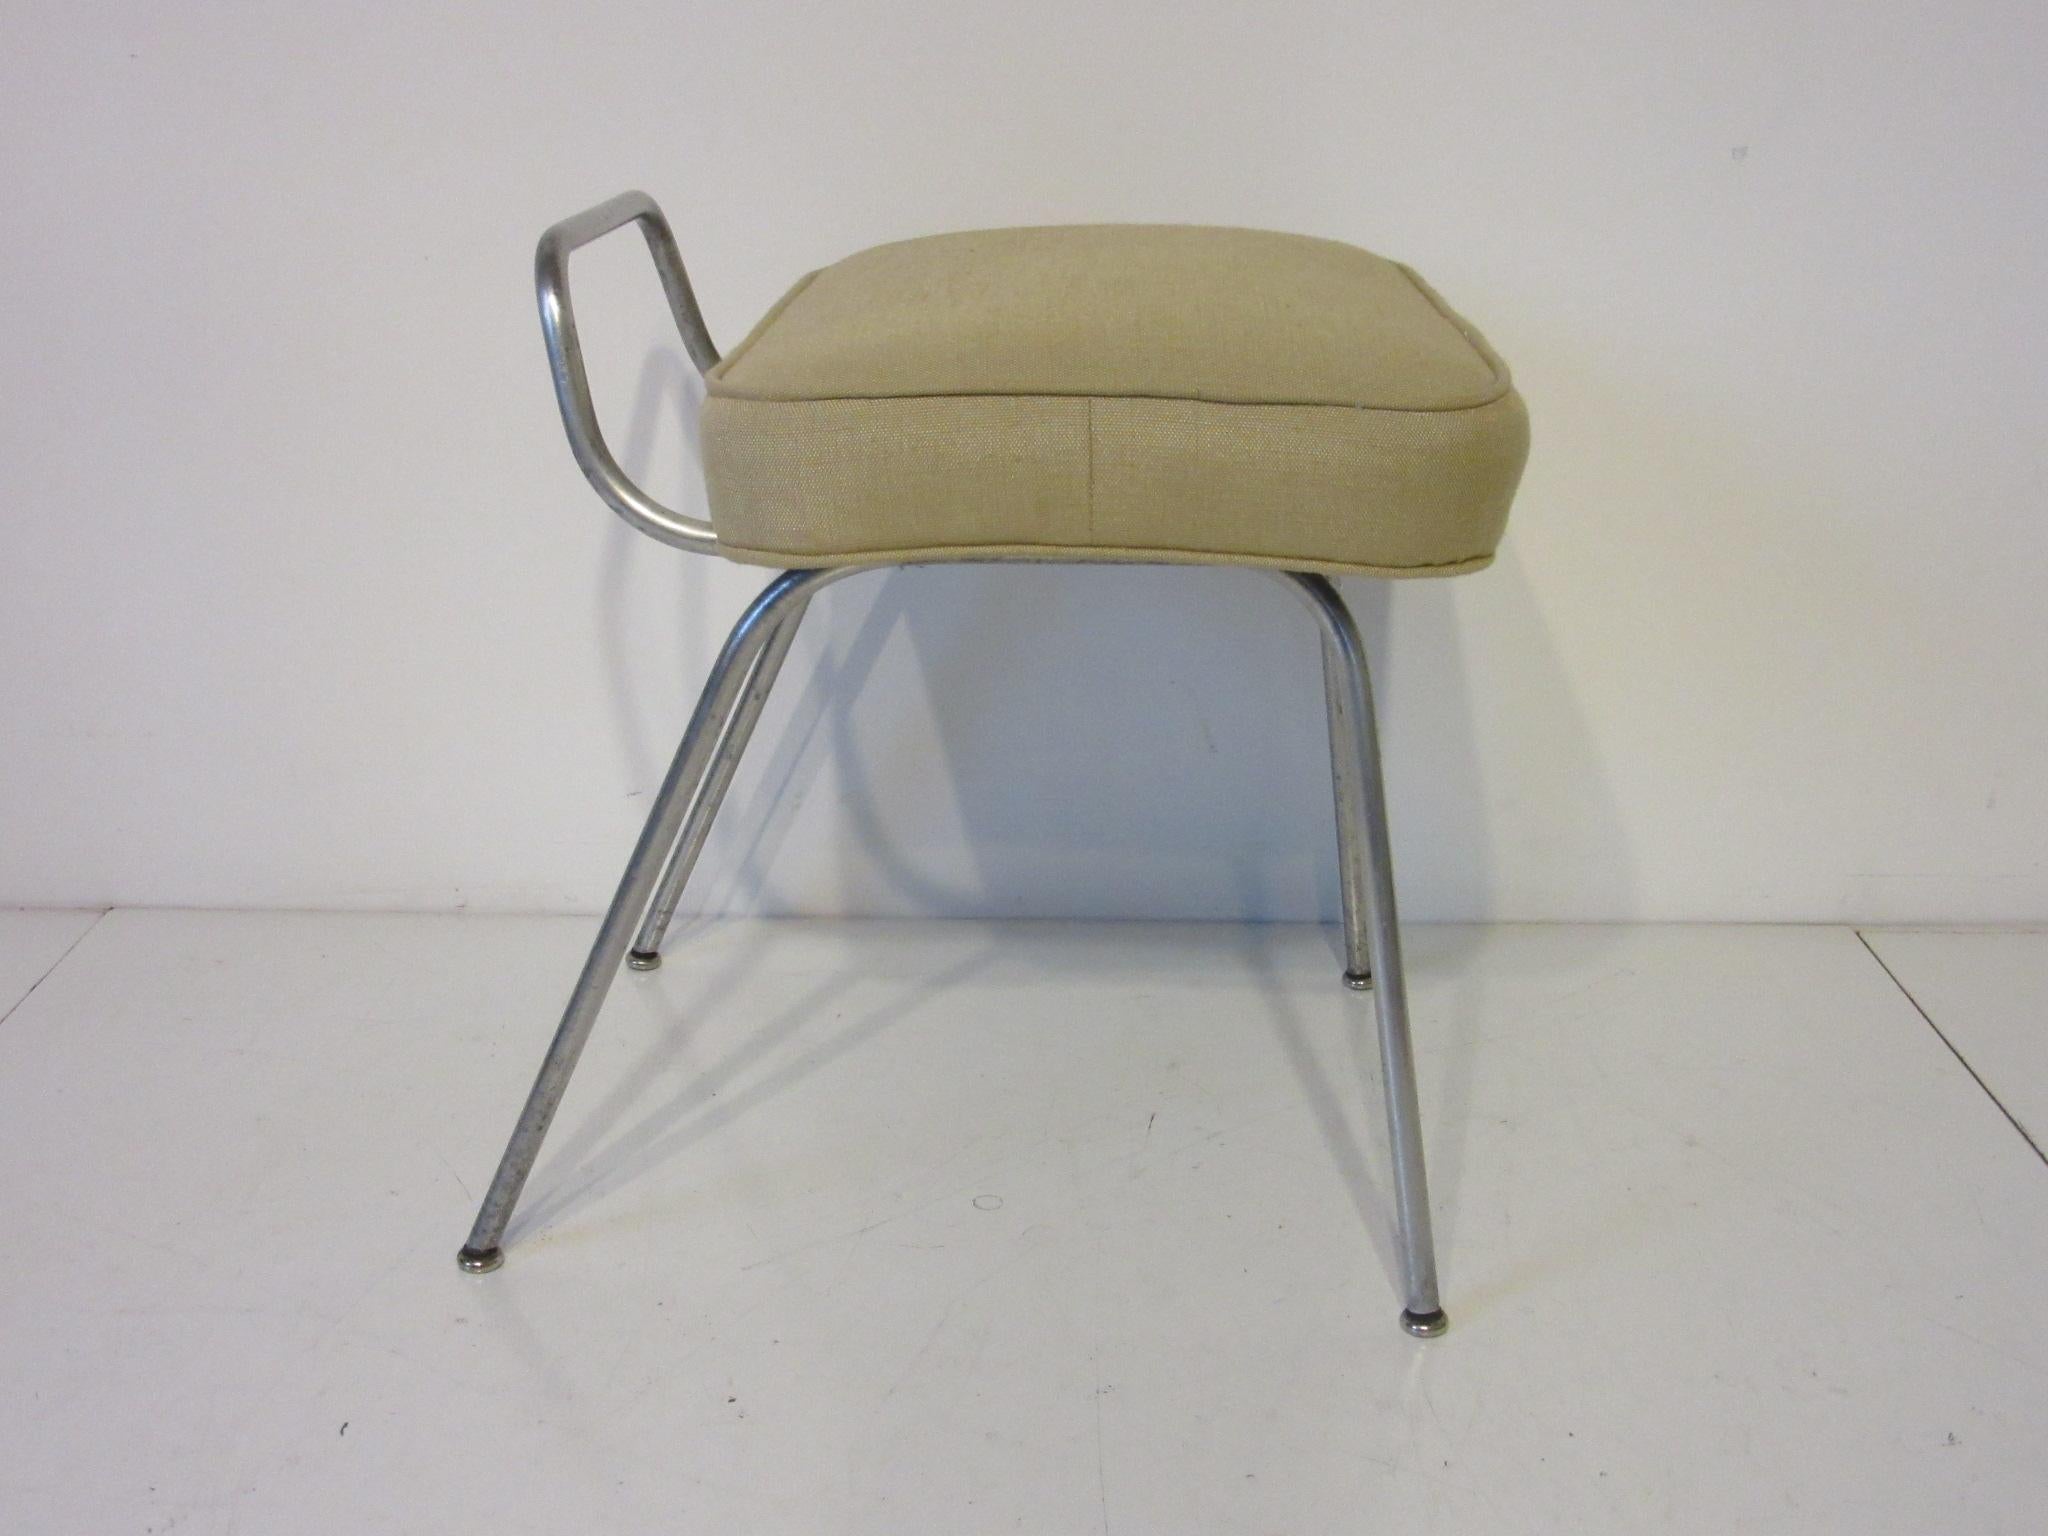 A satin aluminum based vanity stool with upholstered cushion and rubber / metal foot pads designed by George Nelson model #4672 produced in the early 1950's by the Herman Miller Furniture company.